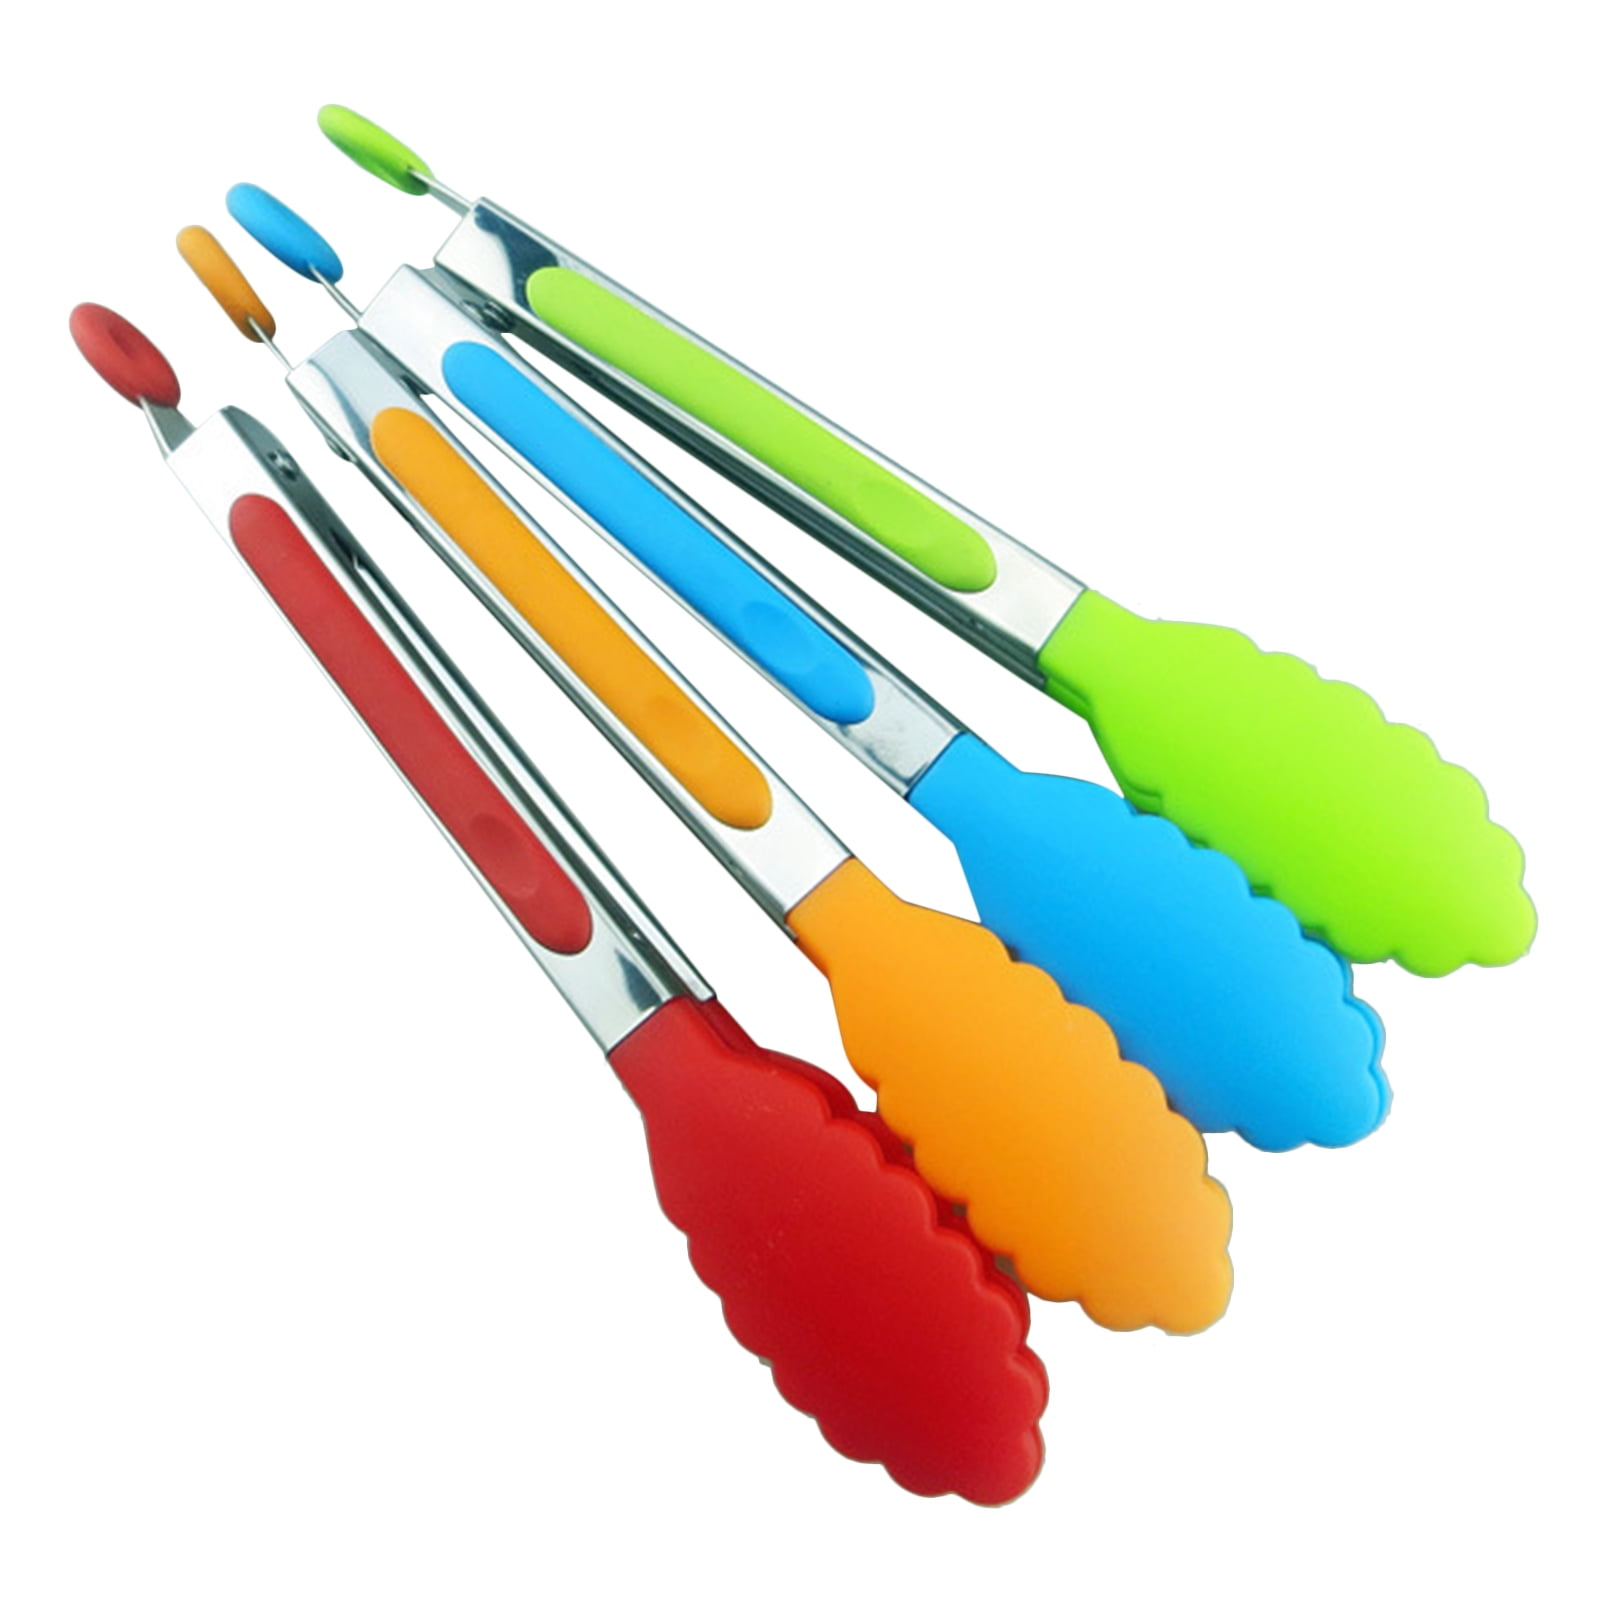 Buy Wholesale China 8 Inch Kitchen Accessories Multifunctional Food Turner  And Set Stainless Steel Silicone Food Tong & Silicone Food Tong at USD 0.51